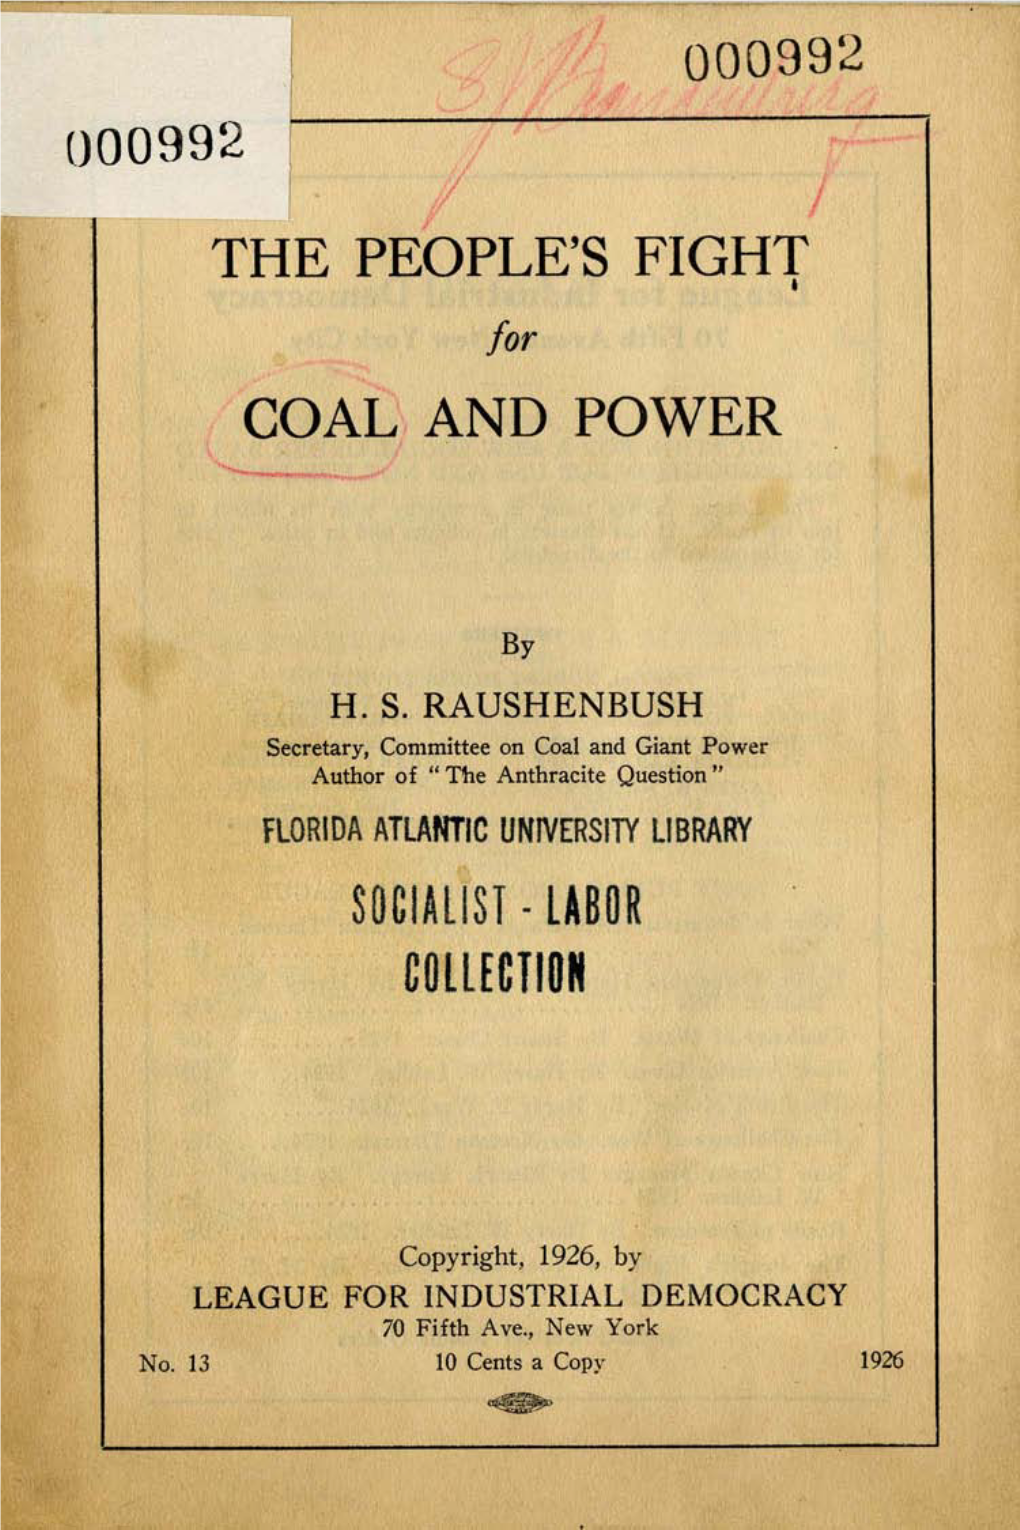 The People's Fight Coal and Power